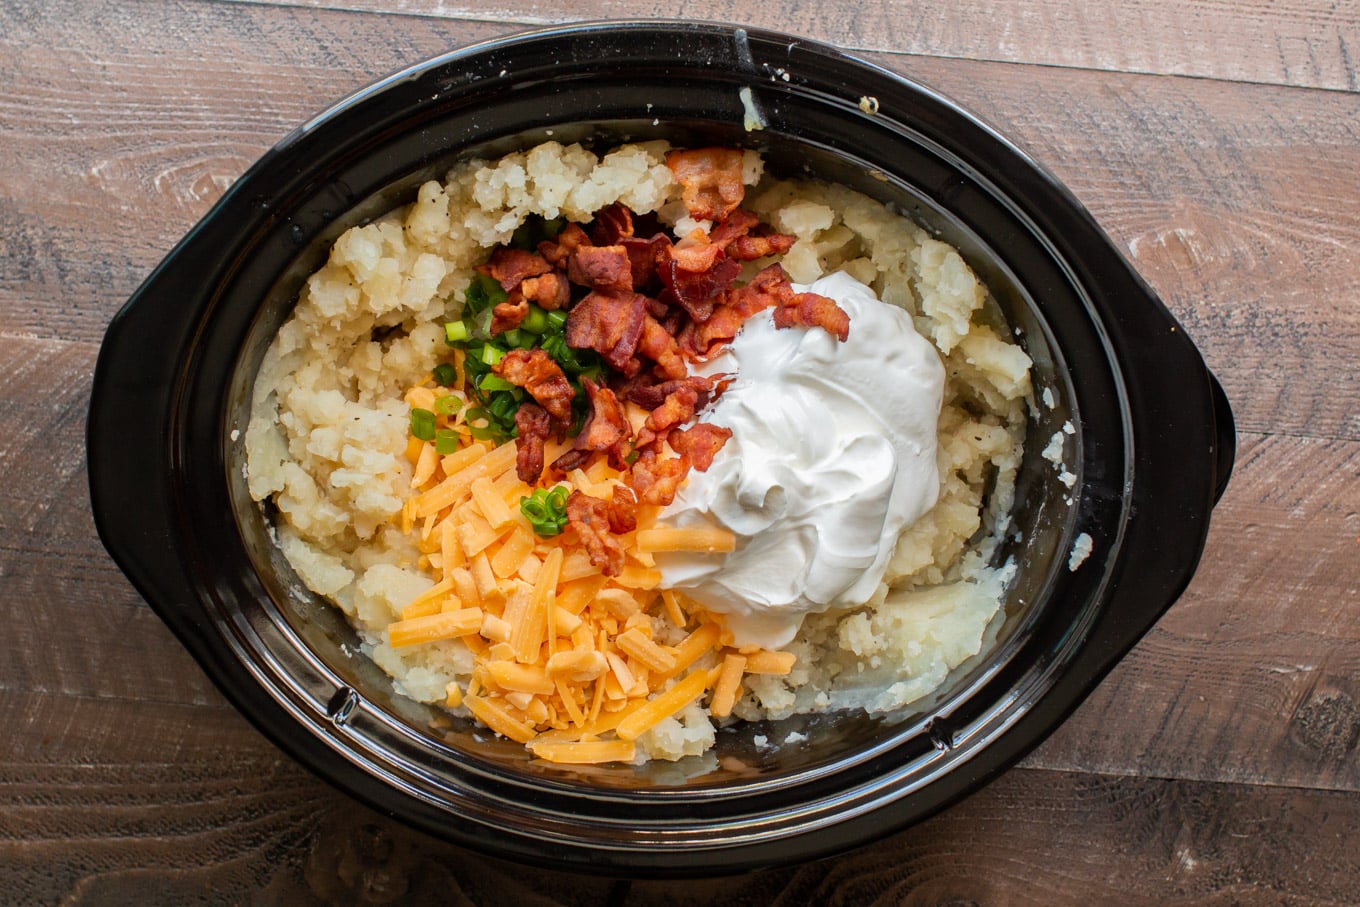 mashed potatoes with sour cream, bacon, green onions and cheese on top.